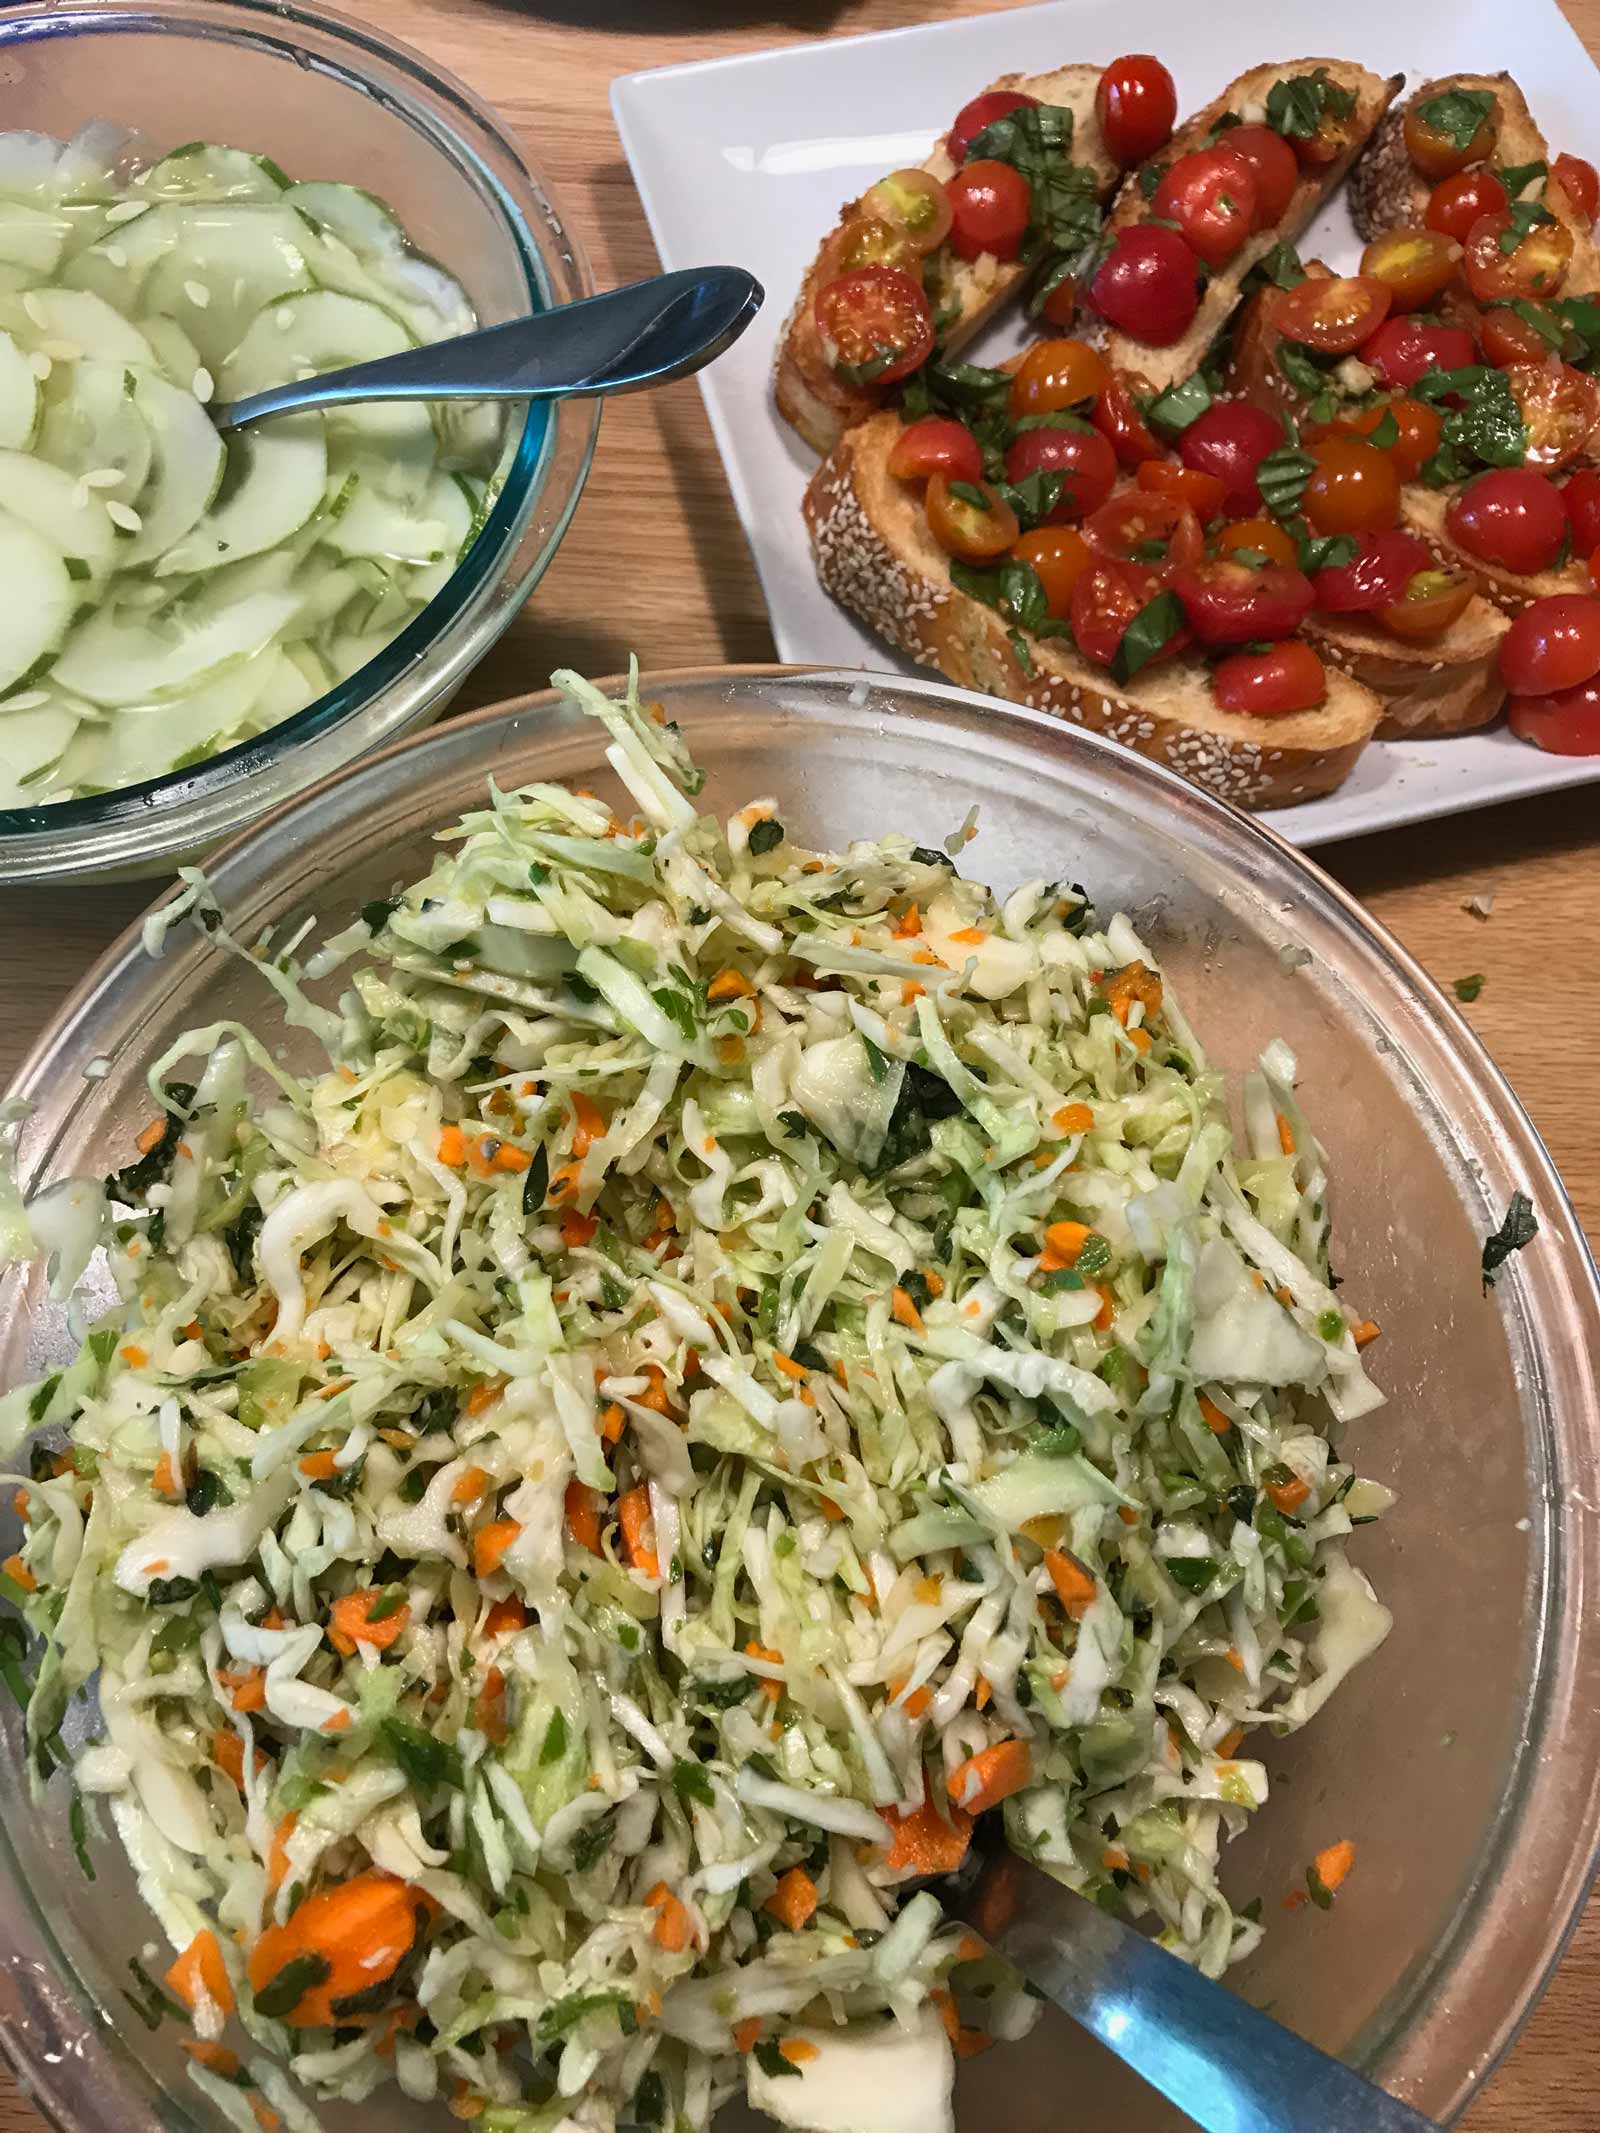 Salads and appetizers.